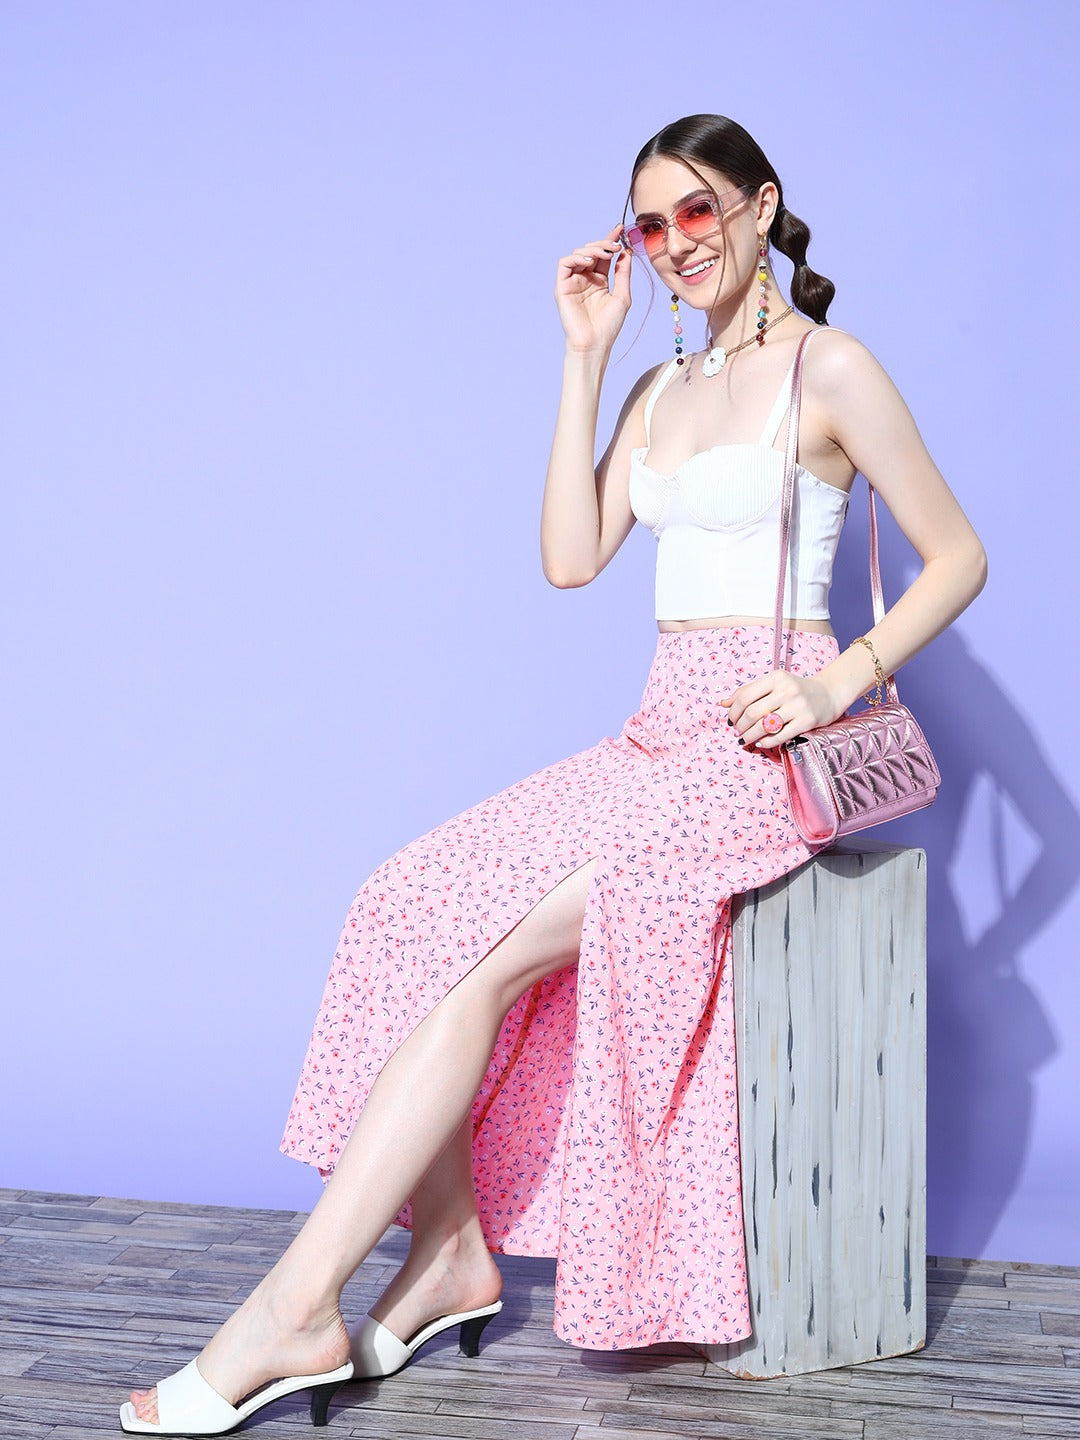 Long skirt outfits: 7 stylish ways to wear a maxi skirt | Woman & Home